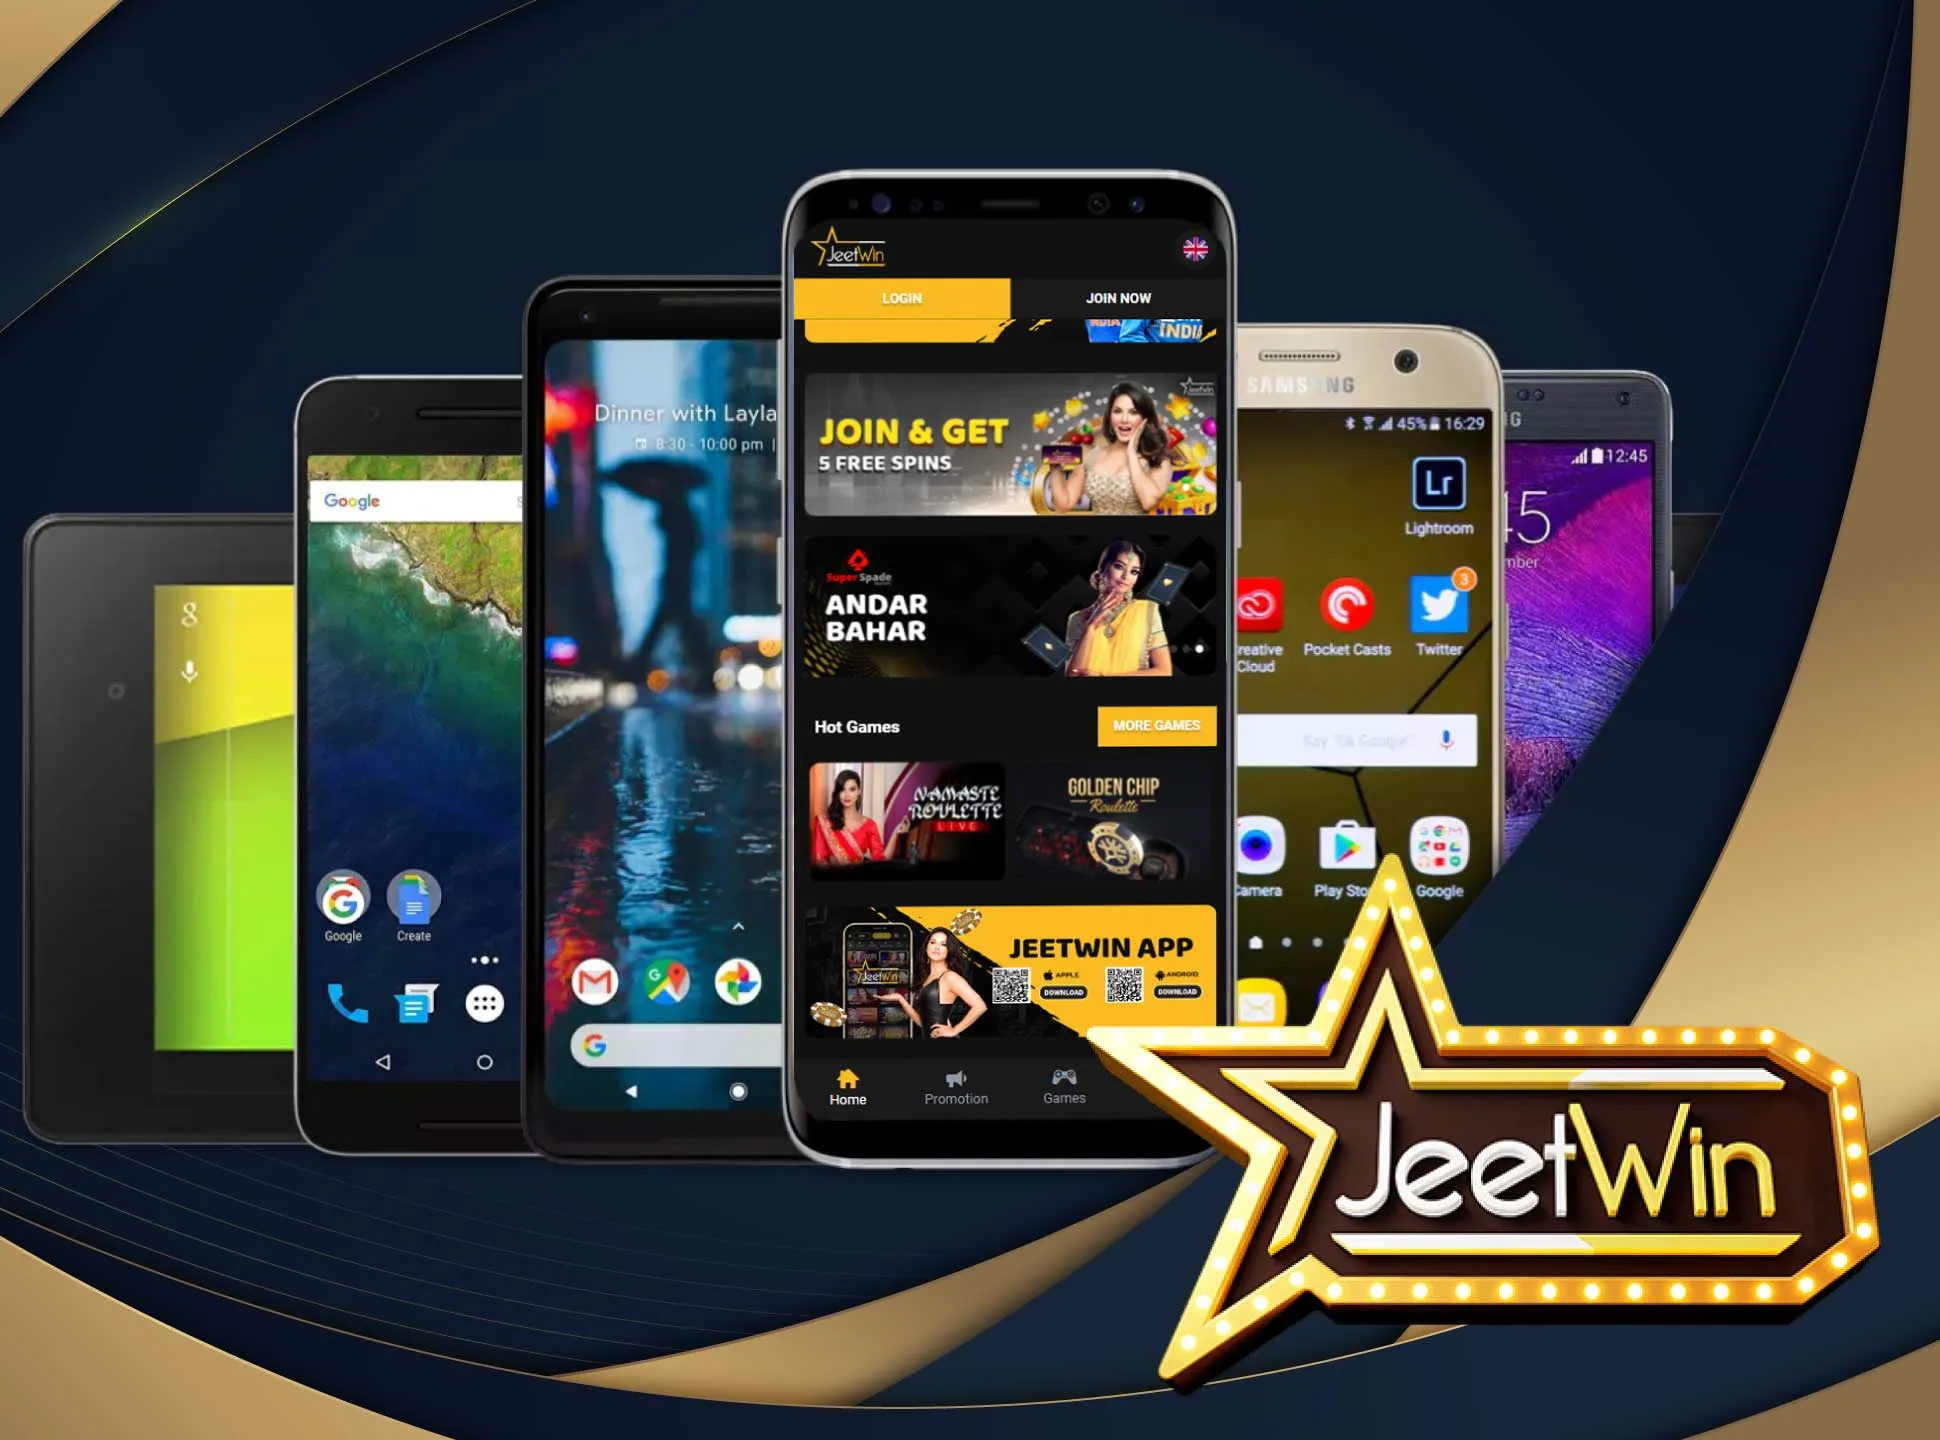 Install the Jeetwin app on any Android device.